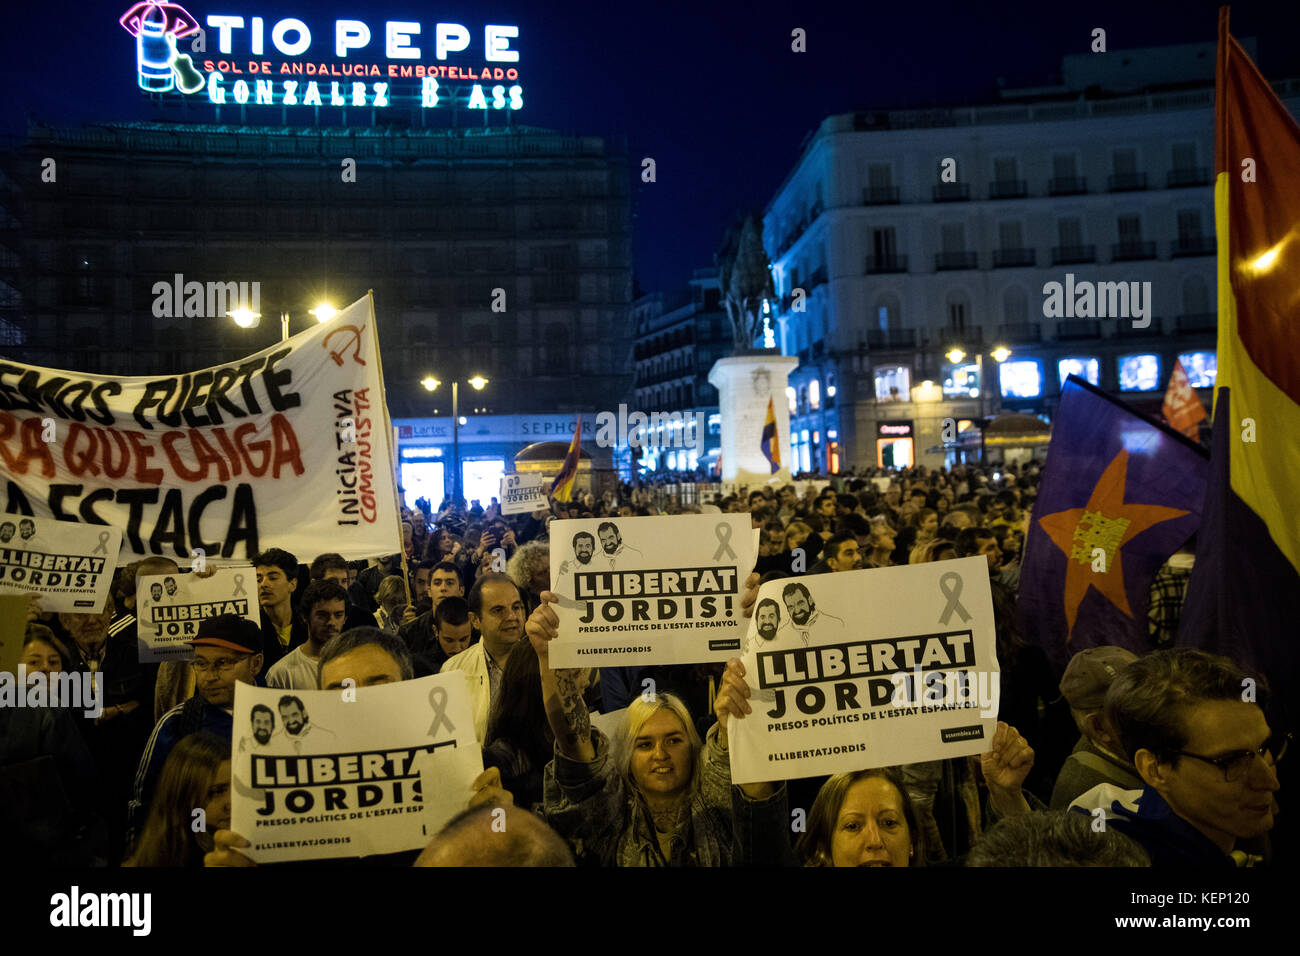 Madrid, Spain. 22nd Oct, 2017. People showing solidarity with Catalonia Independence process demanding freedom for Catalan leaders Jordi Sanchez and Jordi Cuixart (known as 'Los Jordis') who are in jail accused of sedition, in Madrid, Spain. Credit: Marcos del Mazo/Alamy Live News Stock Photo